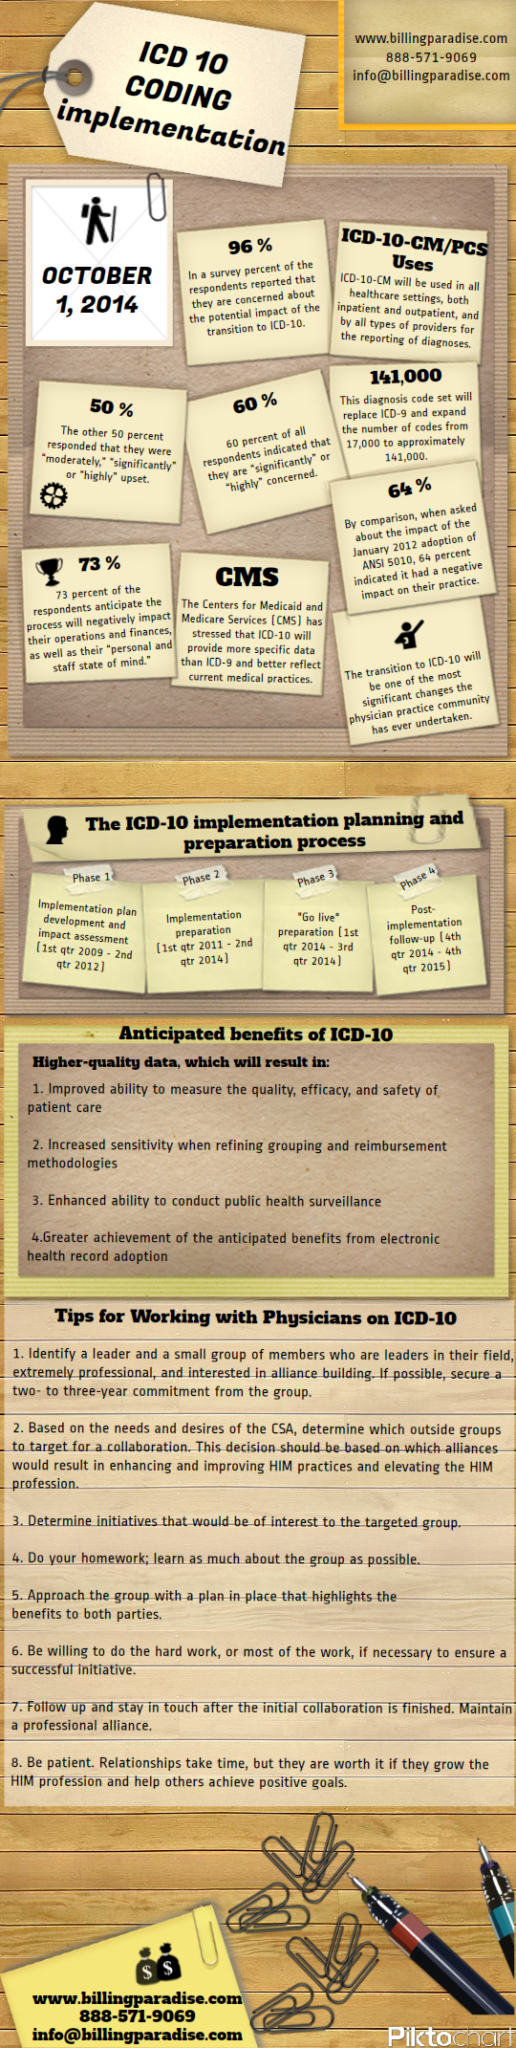 My-Infographic-icd-19